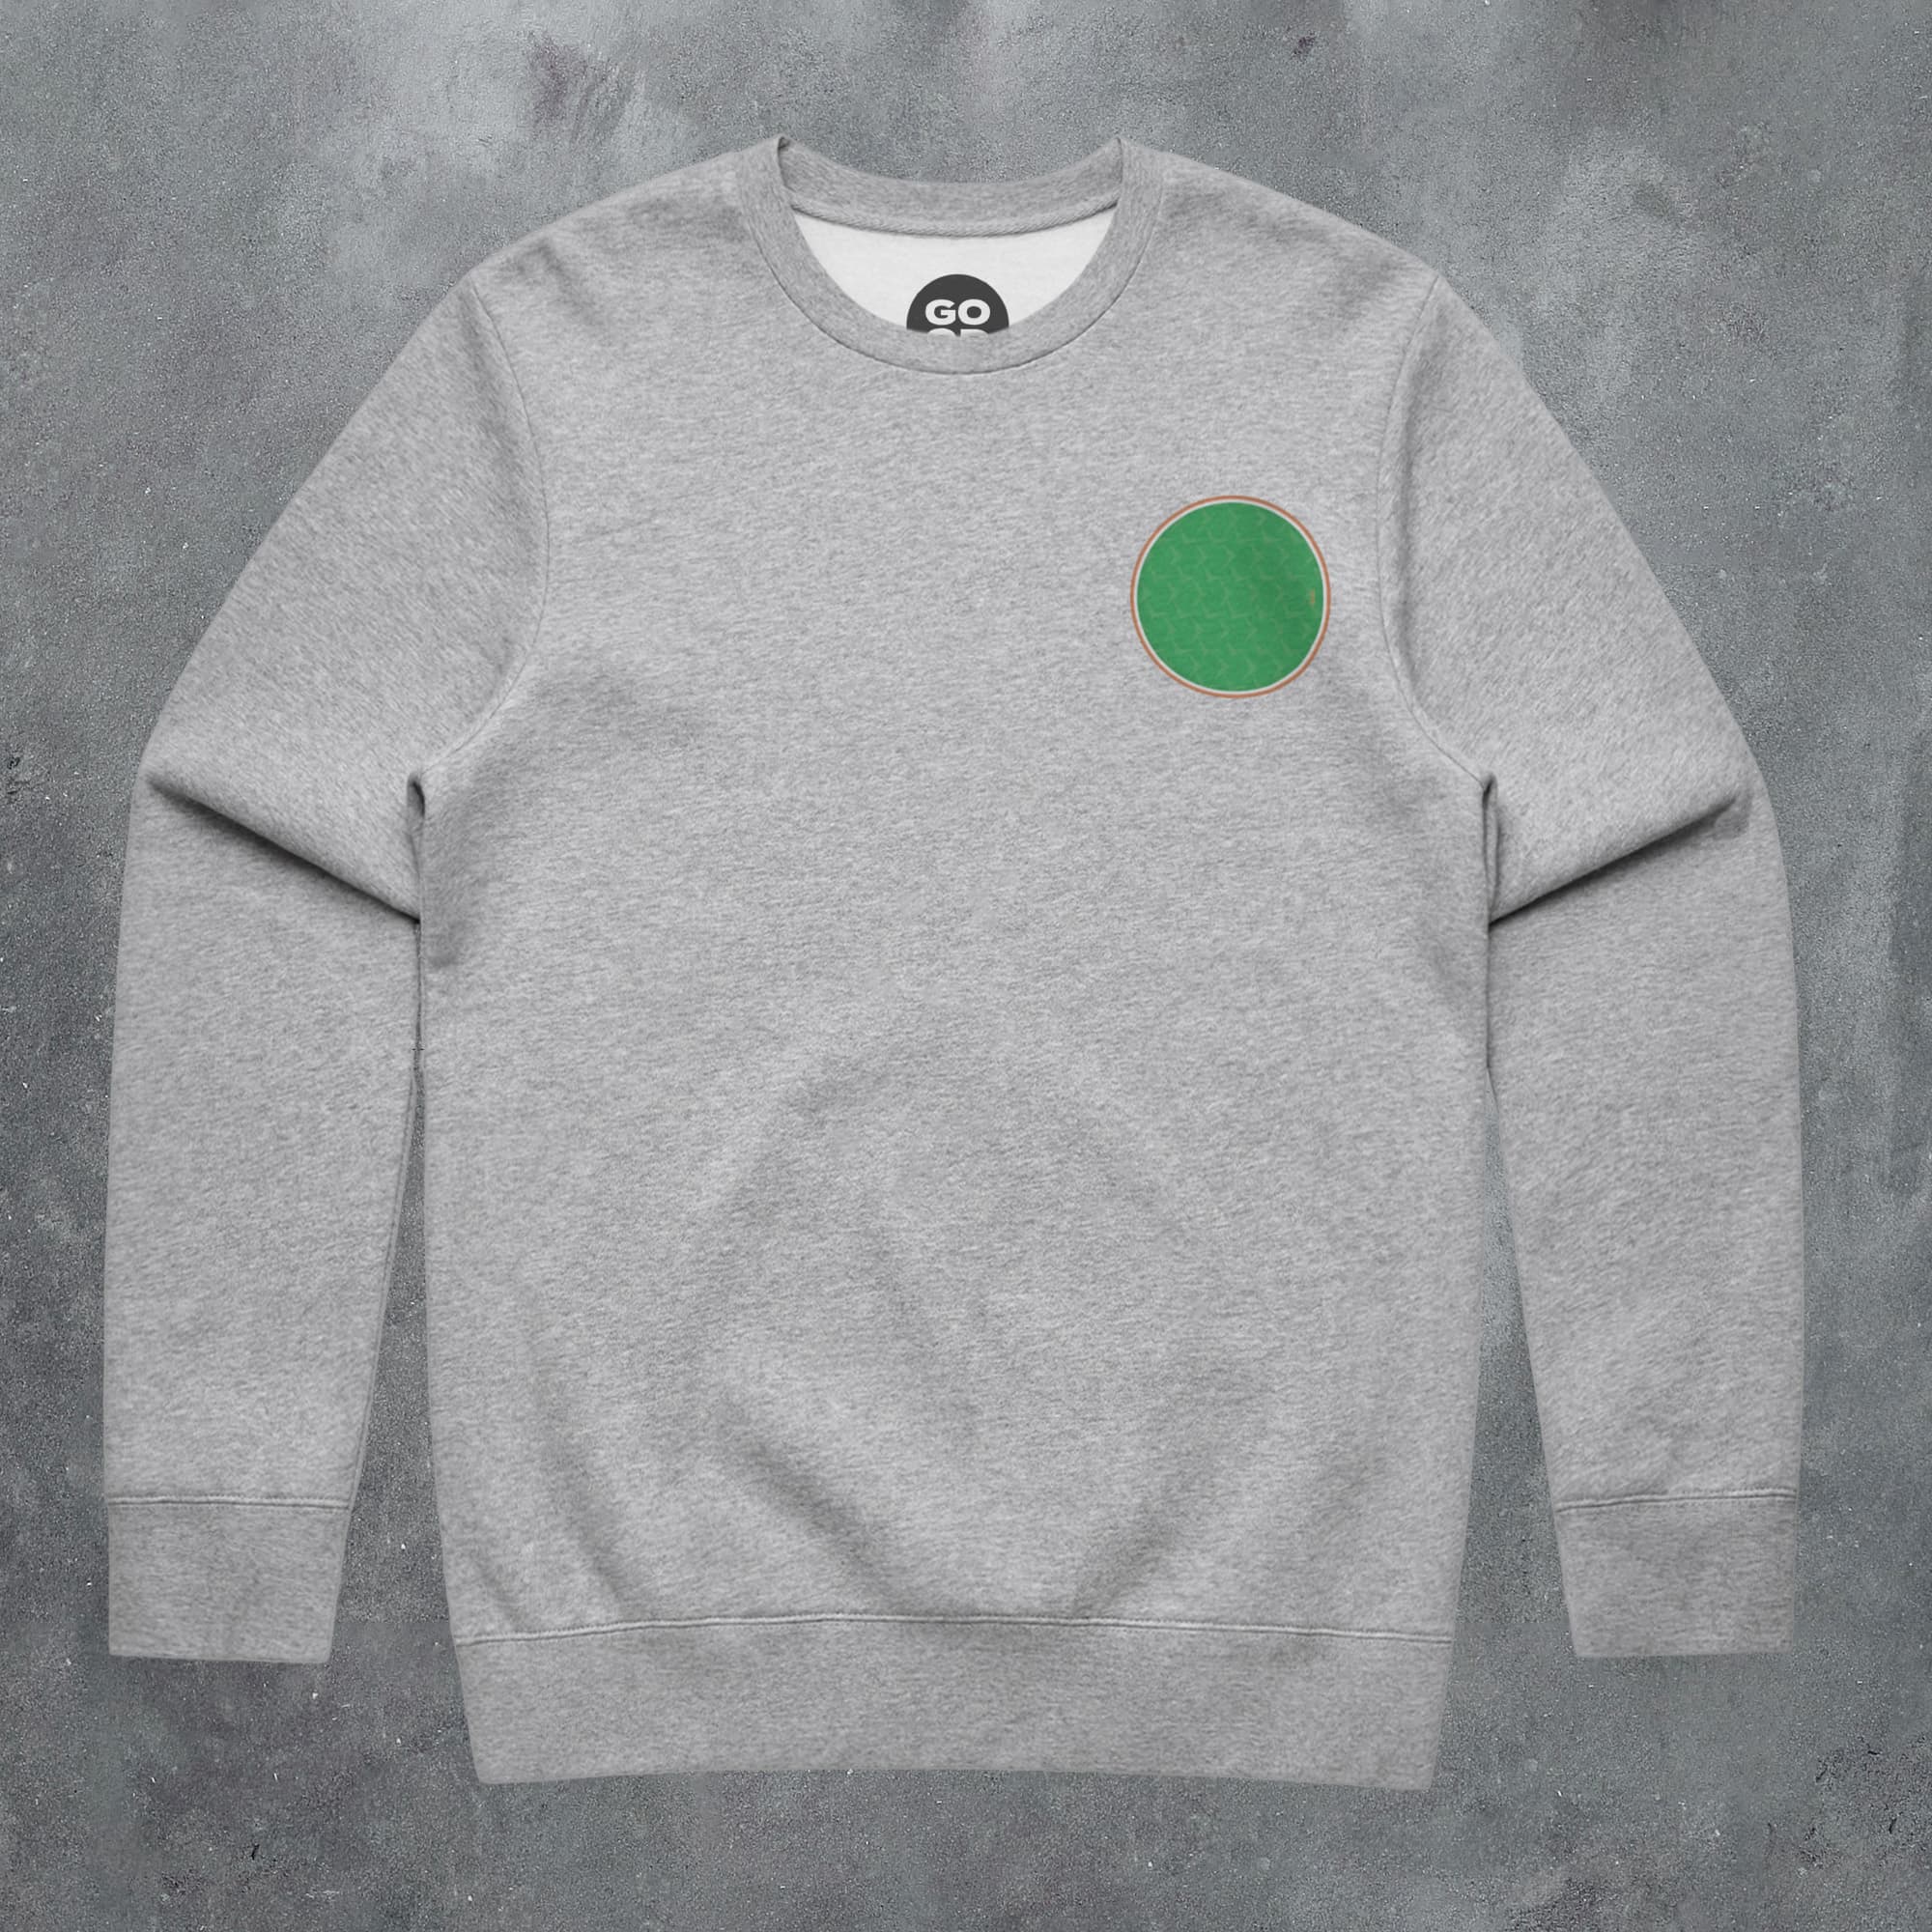 a grey sweatshirt with a green circle on the front